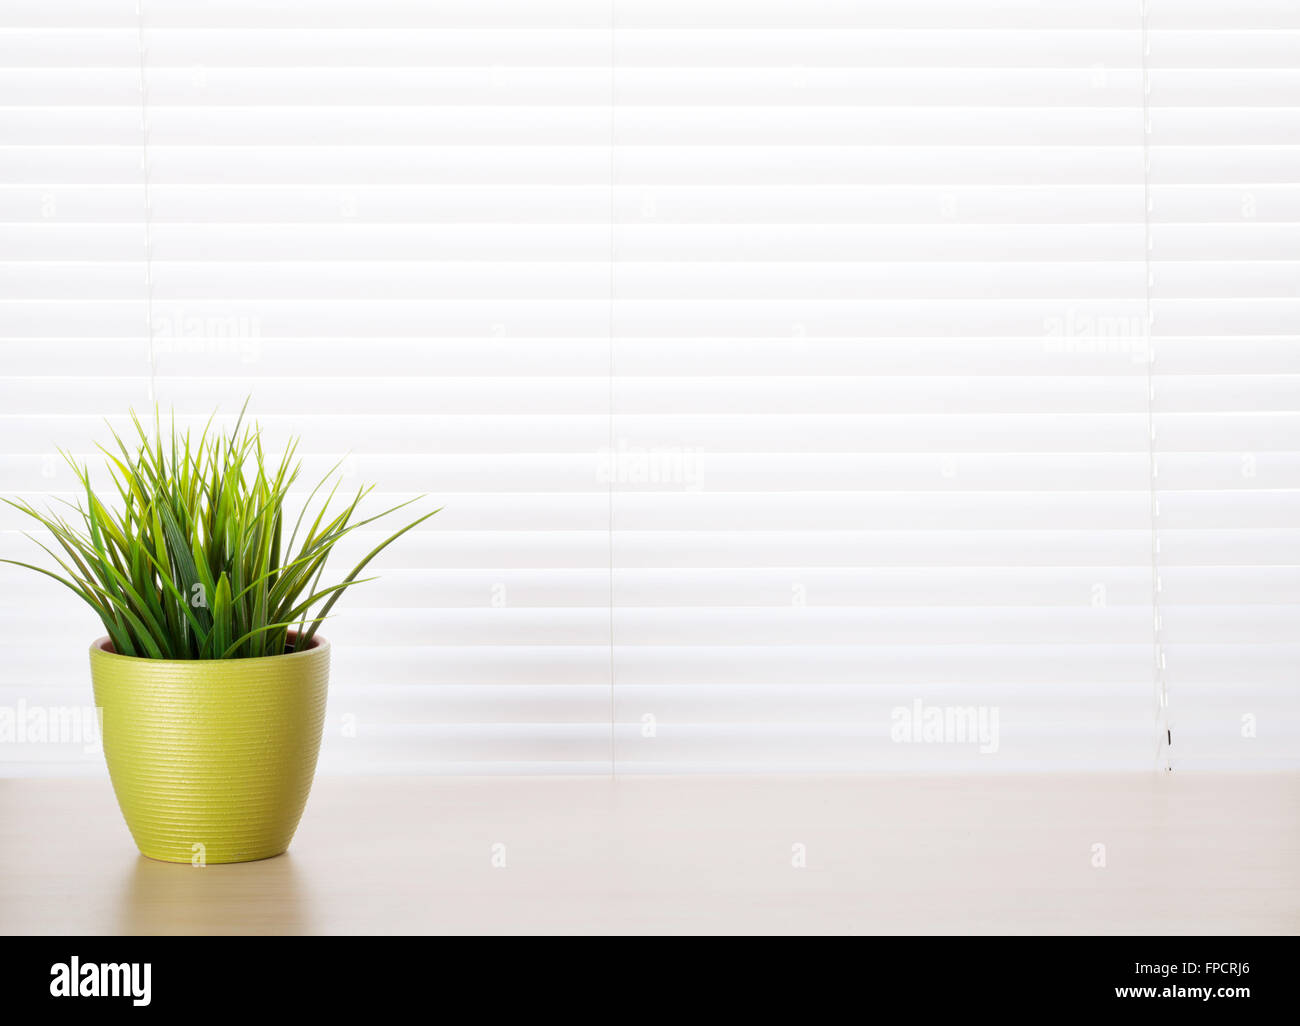 Office workplace with potted plant on wood desk table in front of window with blinds Stock Photo